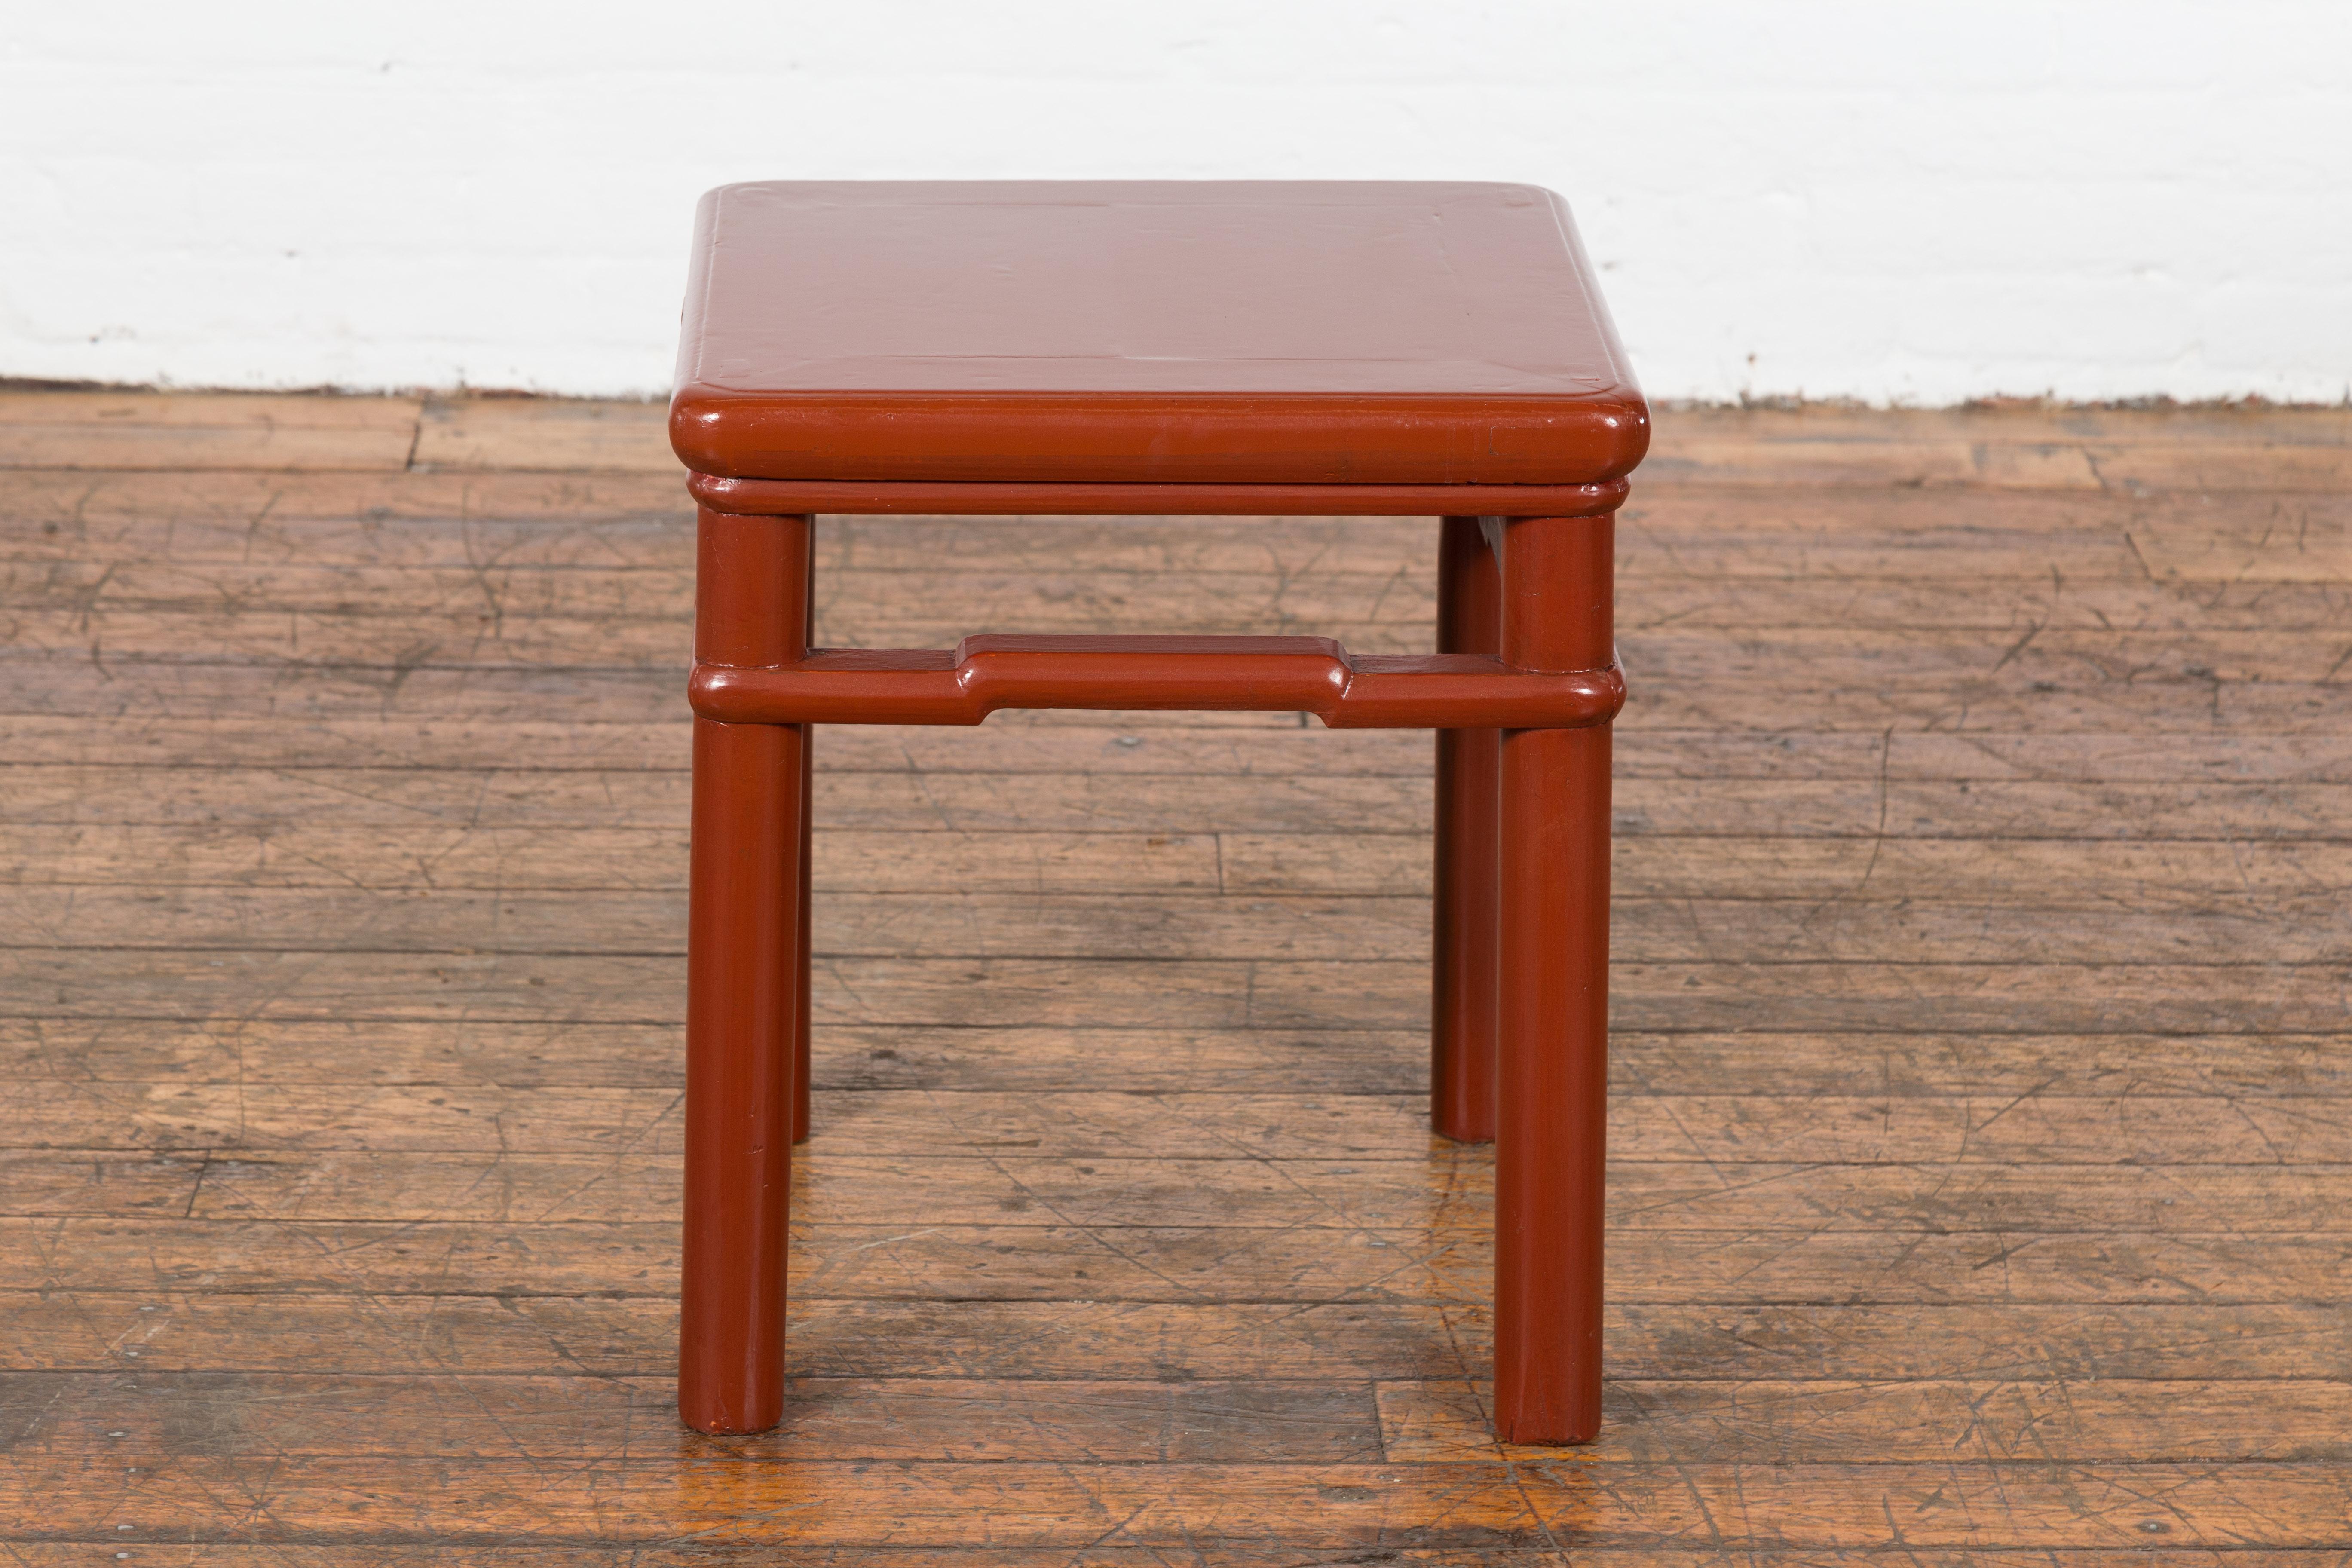 Chinese 1900s Qing Dynasty Red Lacquer Stool or Table with Humpback Stretchers In Good Condition For Sale In Yonkers, NY